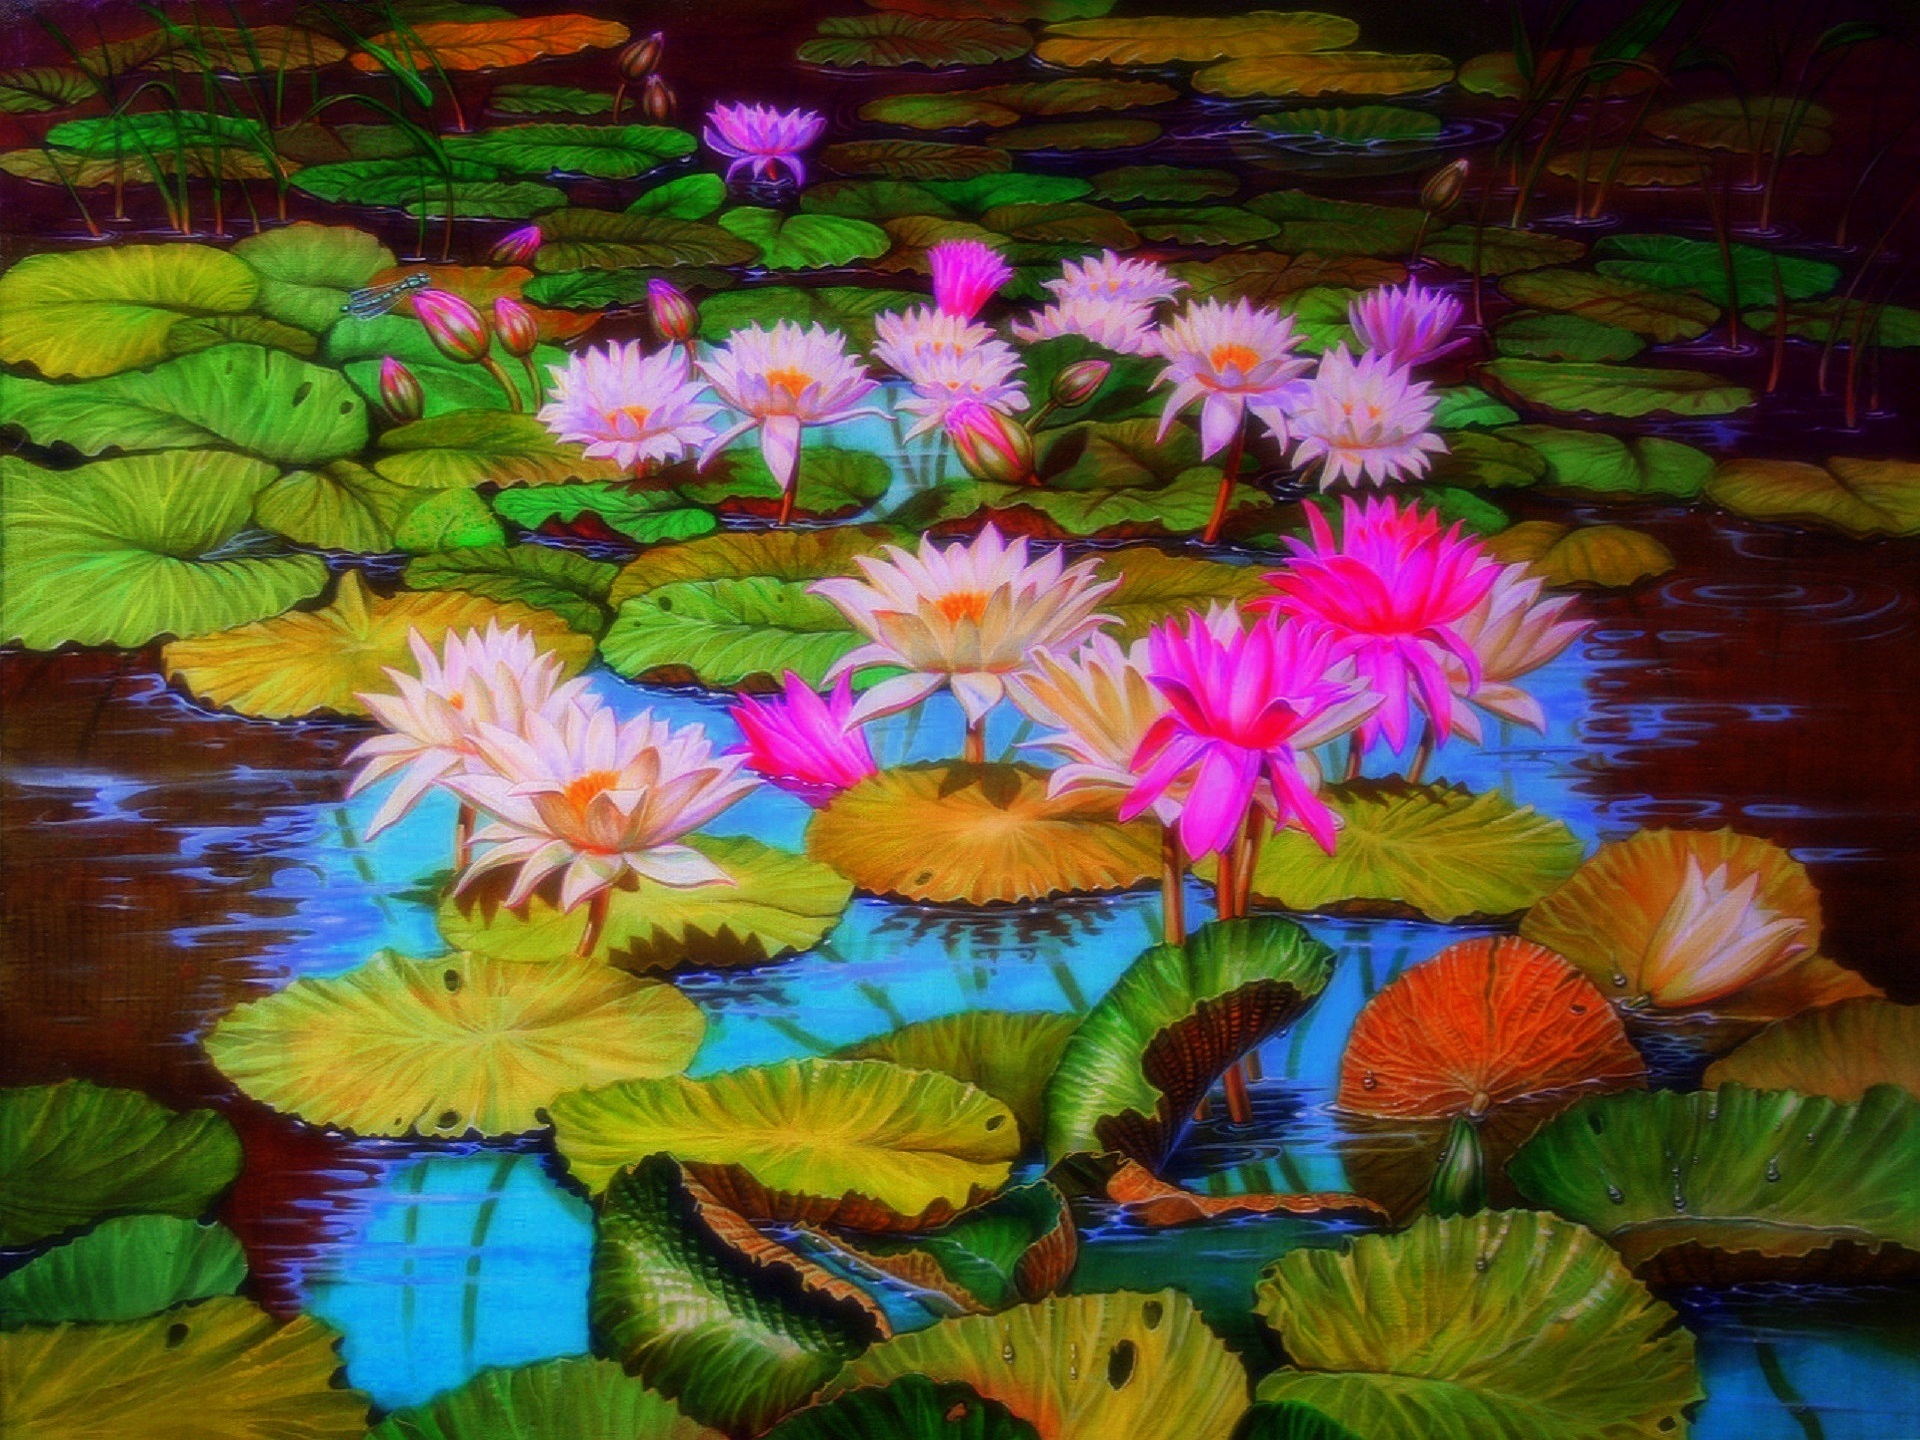 Artistic Flower Lily Pad Lotus Nature Painting Pink Flower Pond 1920x1440